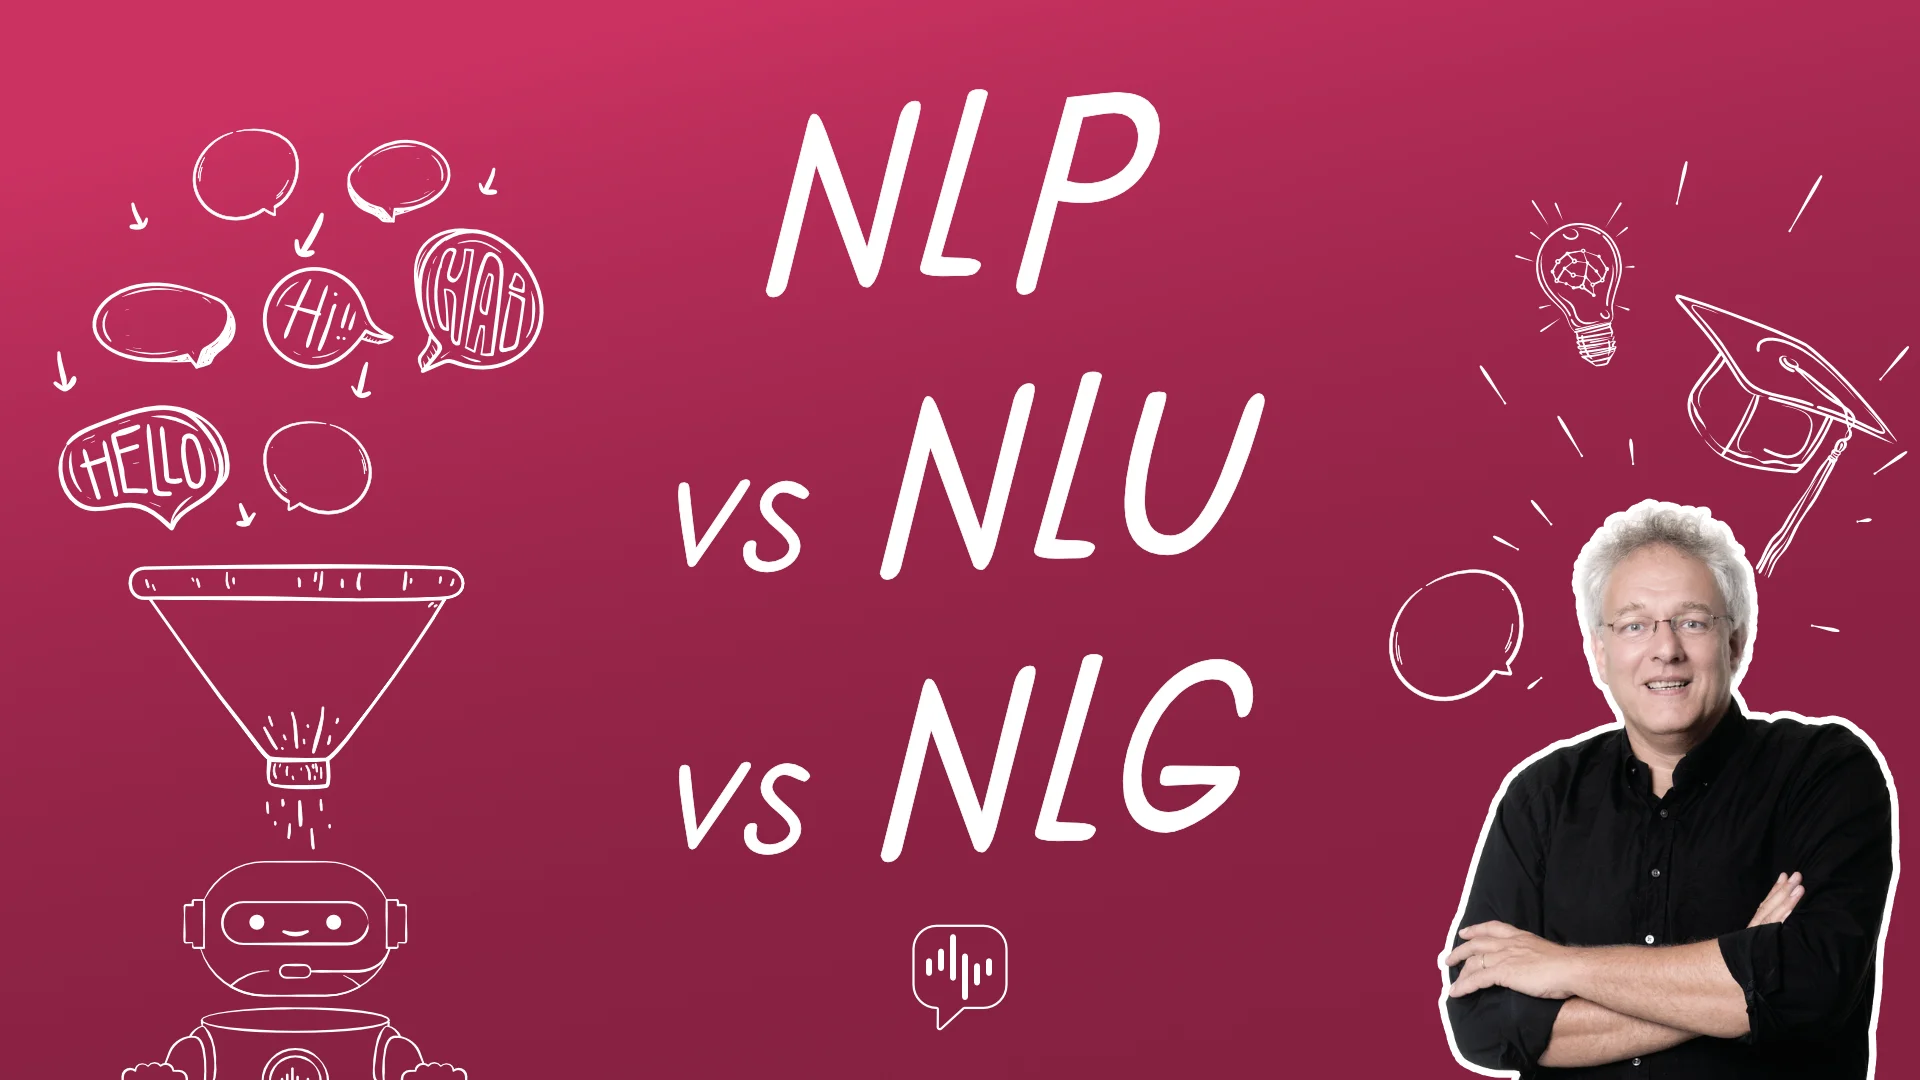 NLP vs. NLU: from Understanding a Language to Its Processing